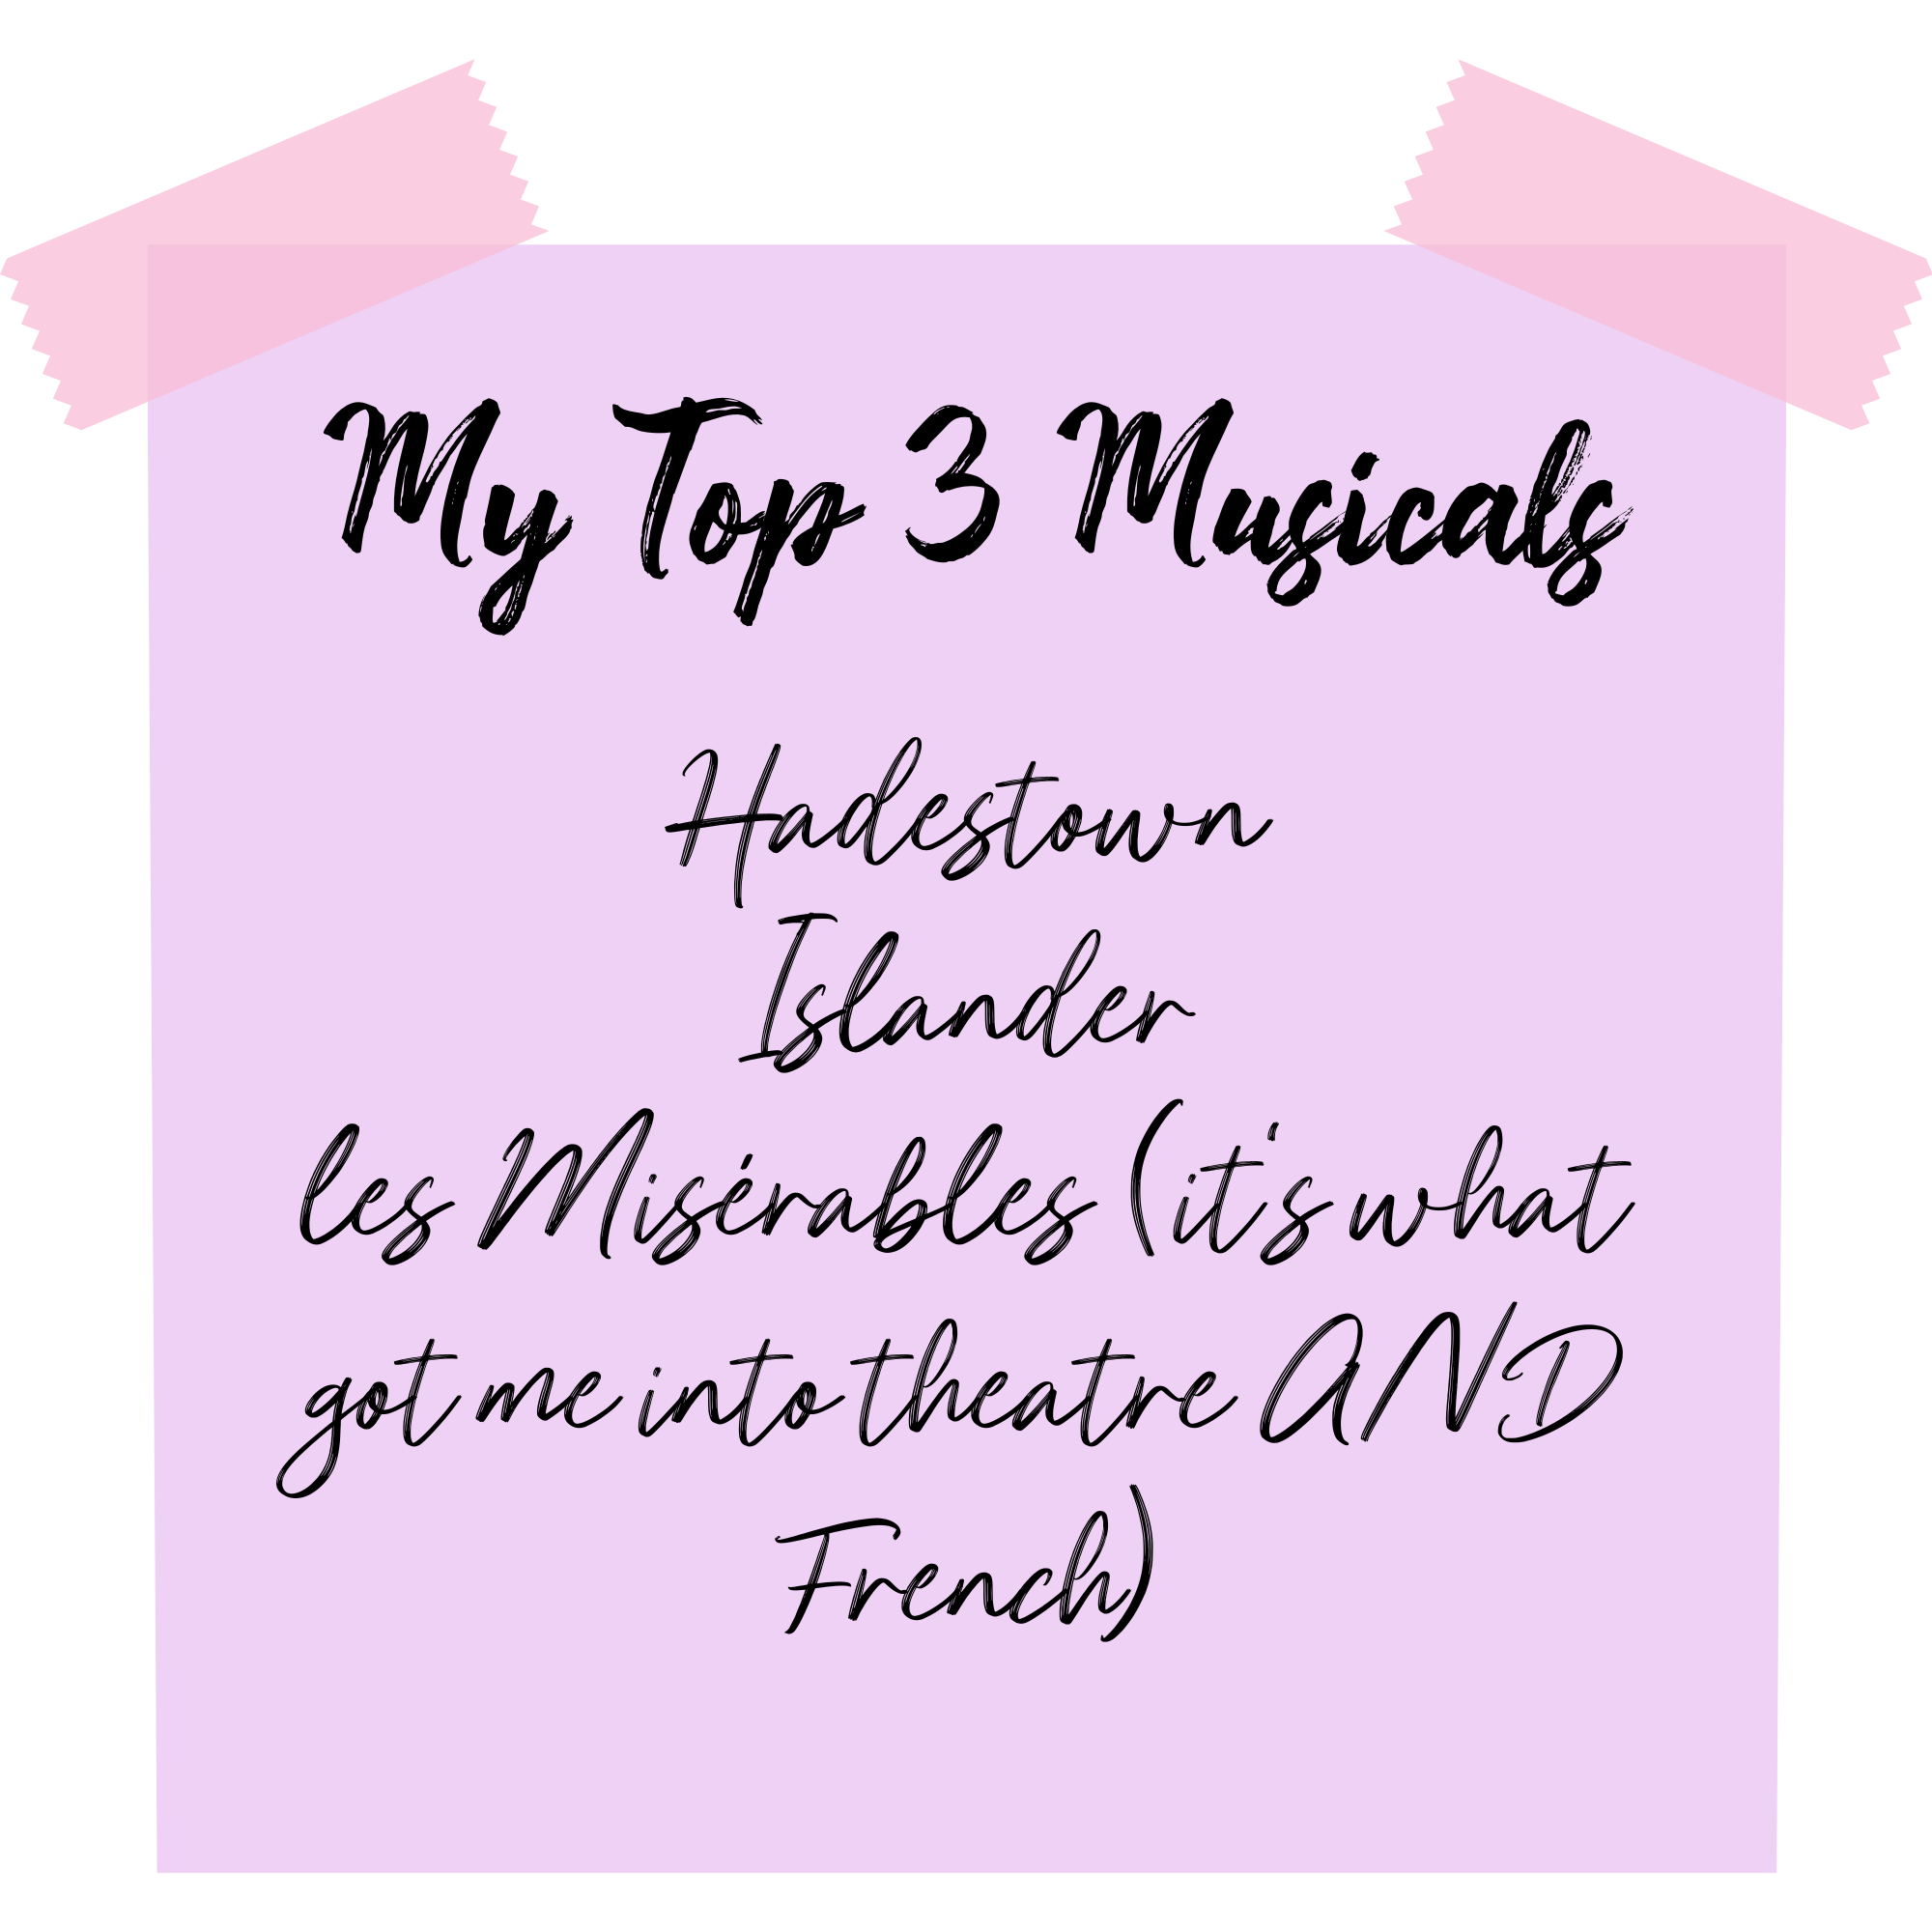 My top 3 Musicals Hadestown Islander les Misérables ( it's what got me into theatre AND French)